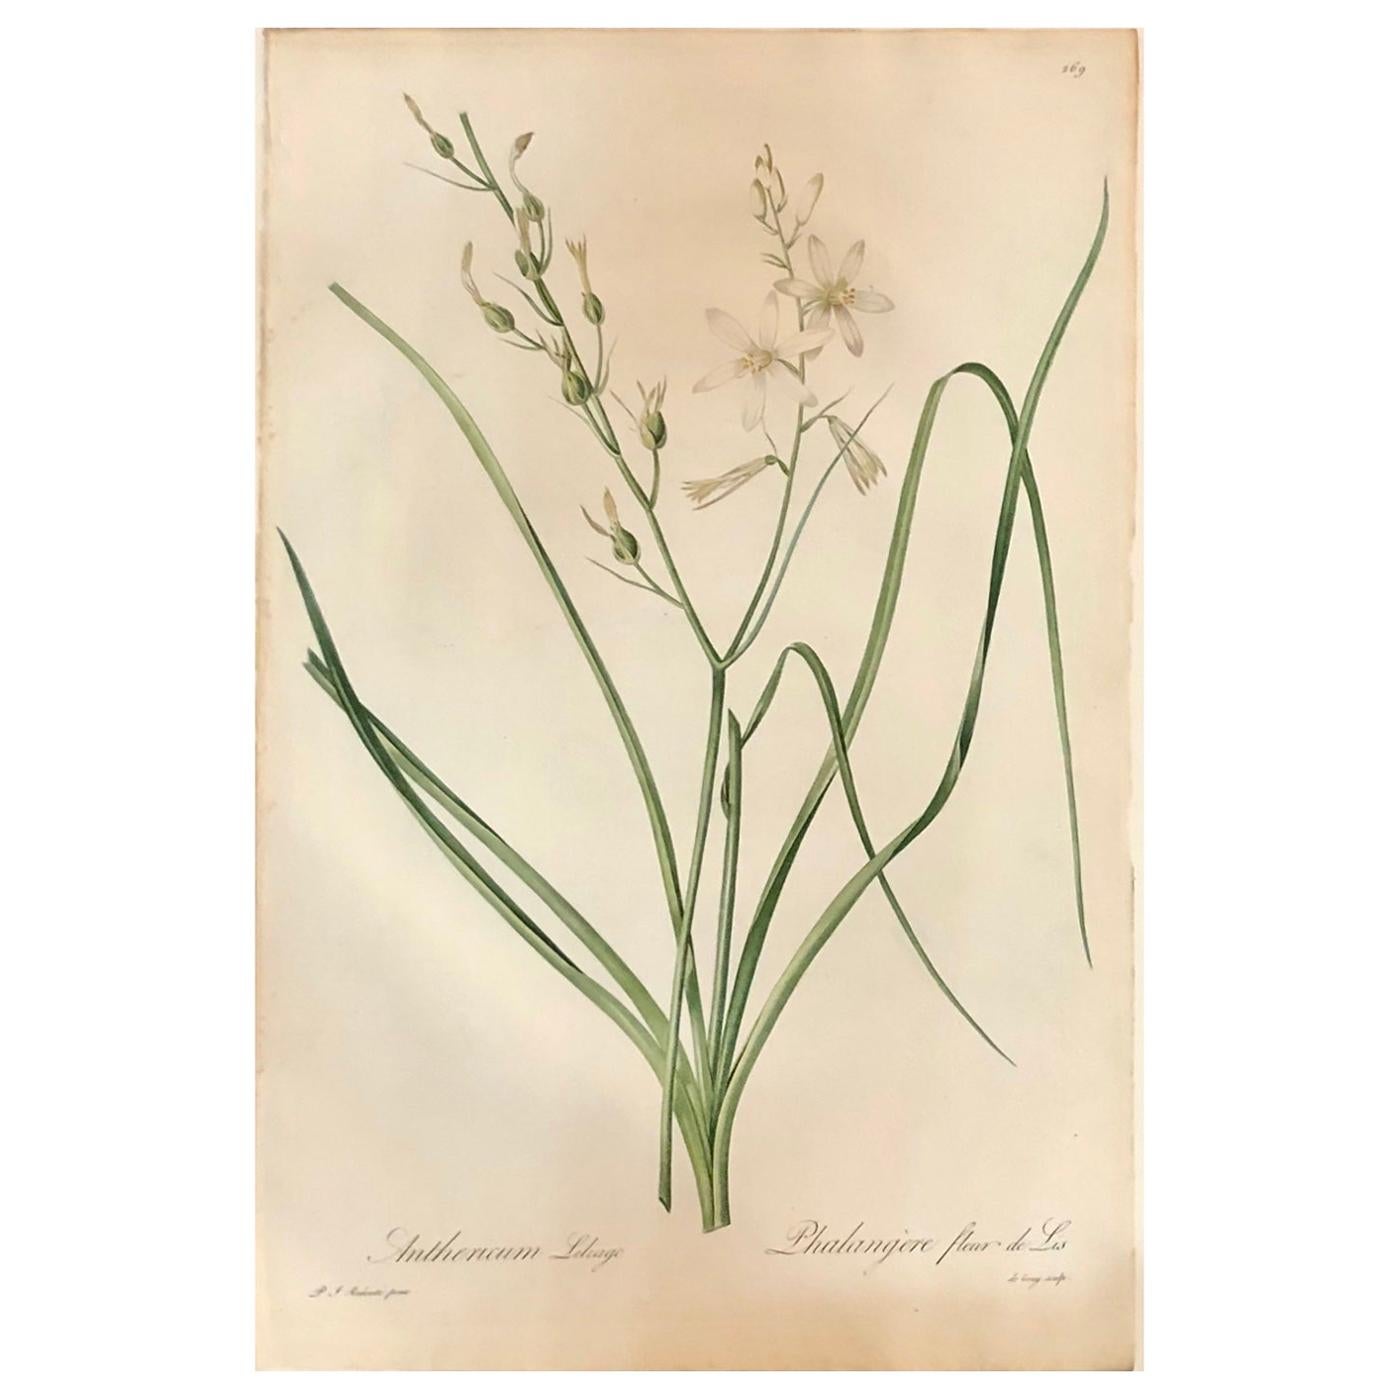 Phalangium Liliago Hand Colored Engraving Signed P.J. Redoute For Sale